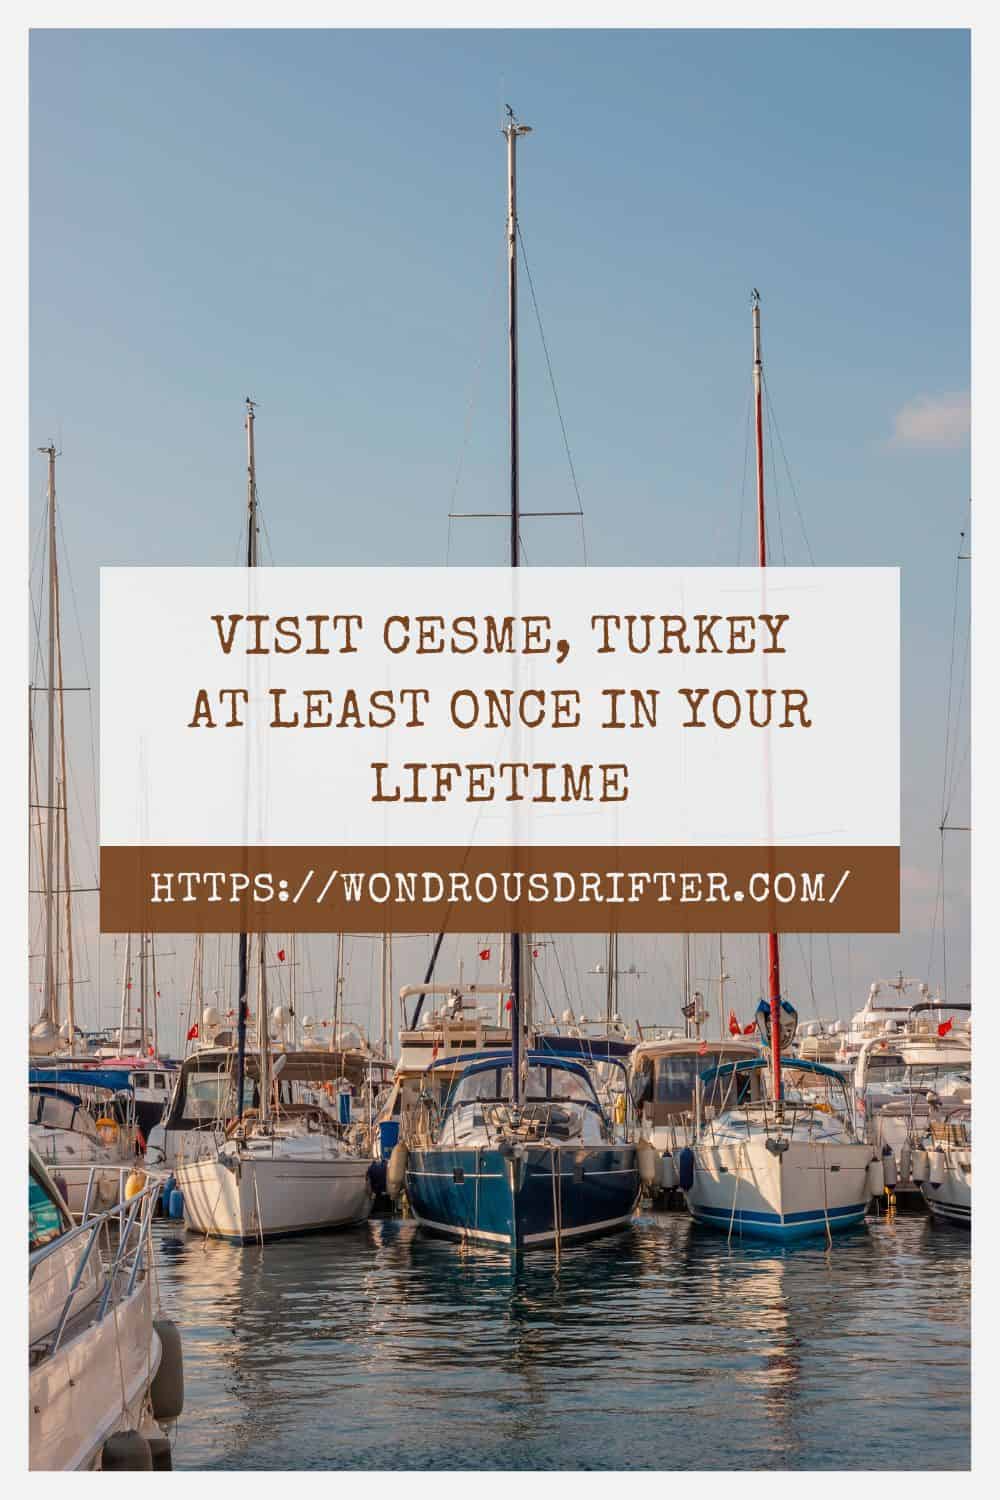 Visit Cesme Turkey at least once in your lifetime